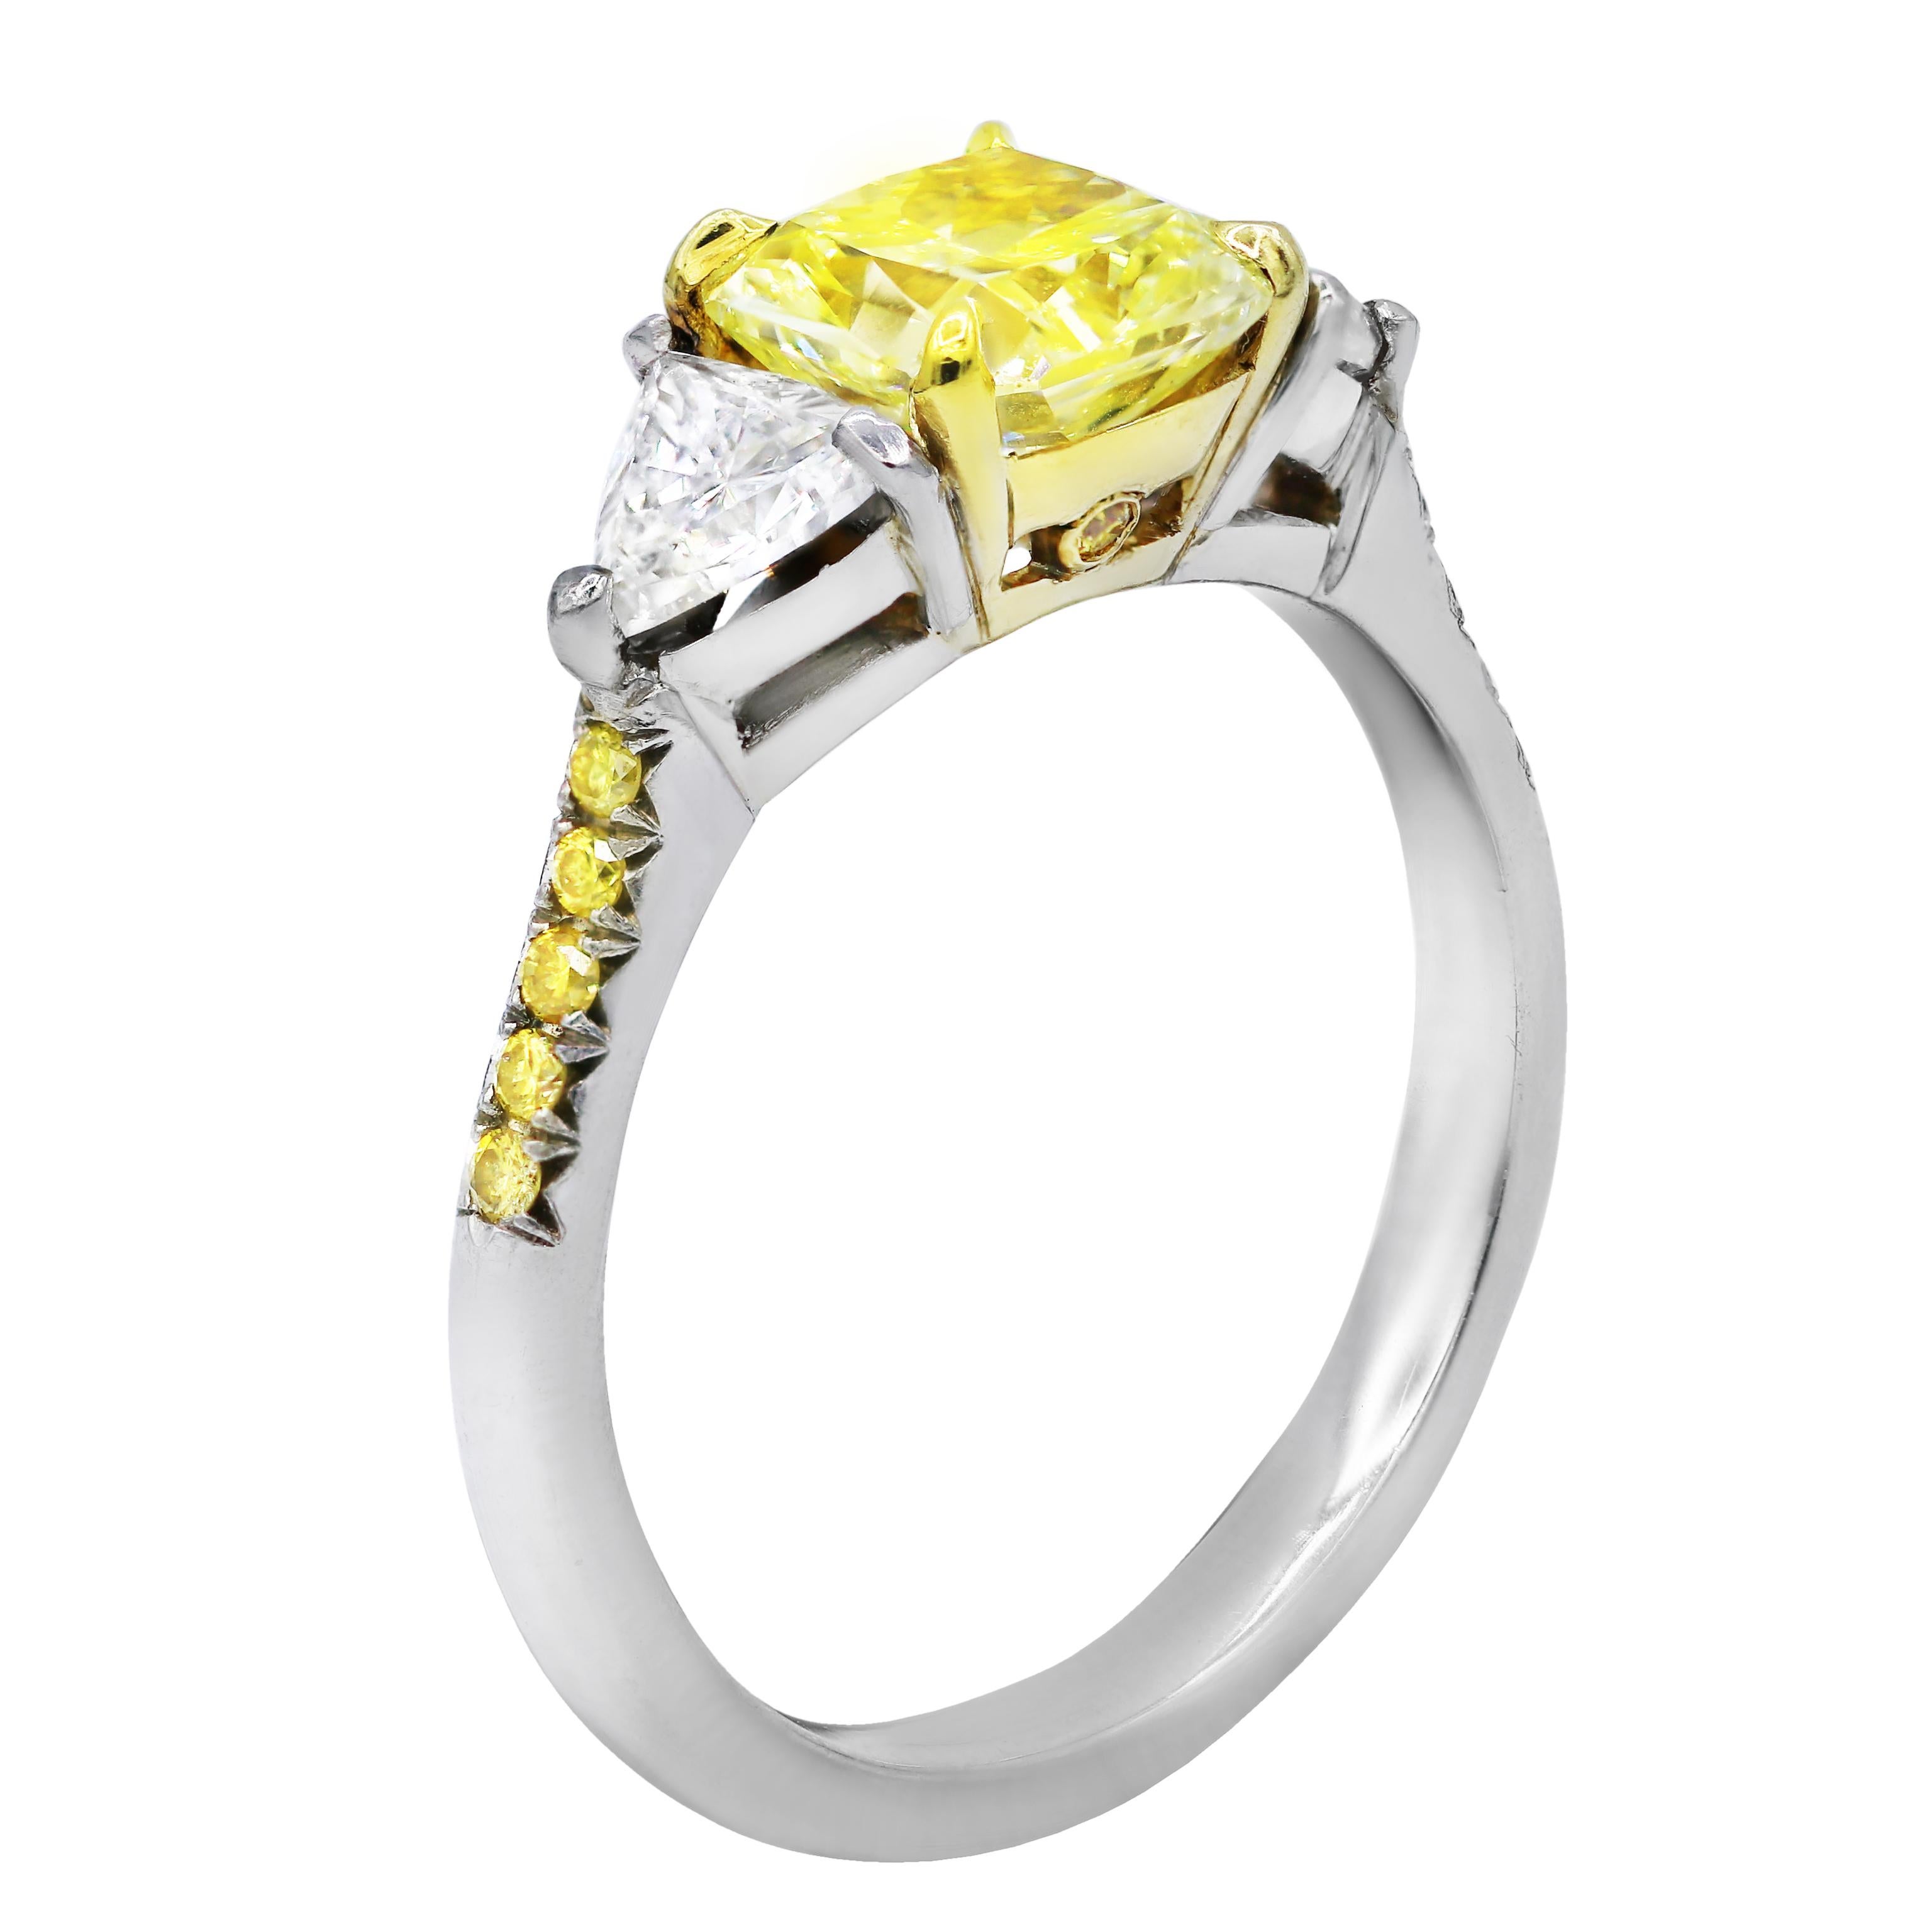 Platinum and 18 kt yellow gold engagement ring featuring a center (FY VS2) 1.42 ct radiant cut yellow diamond with 0.76 cts tw of trillion diamonds on the sides and round diamonds on the band
Diana M. is a leading supplier of top-quality fine